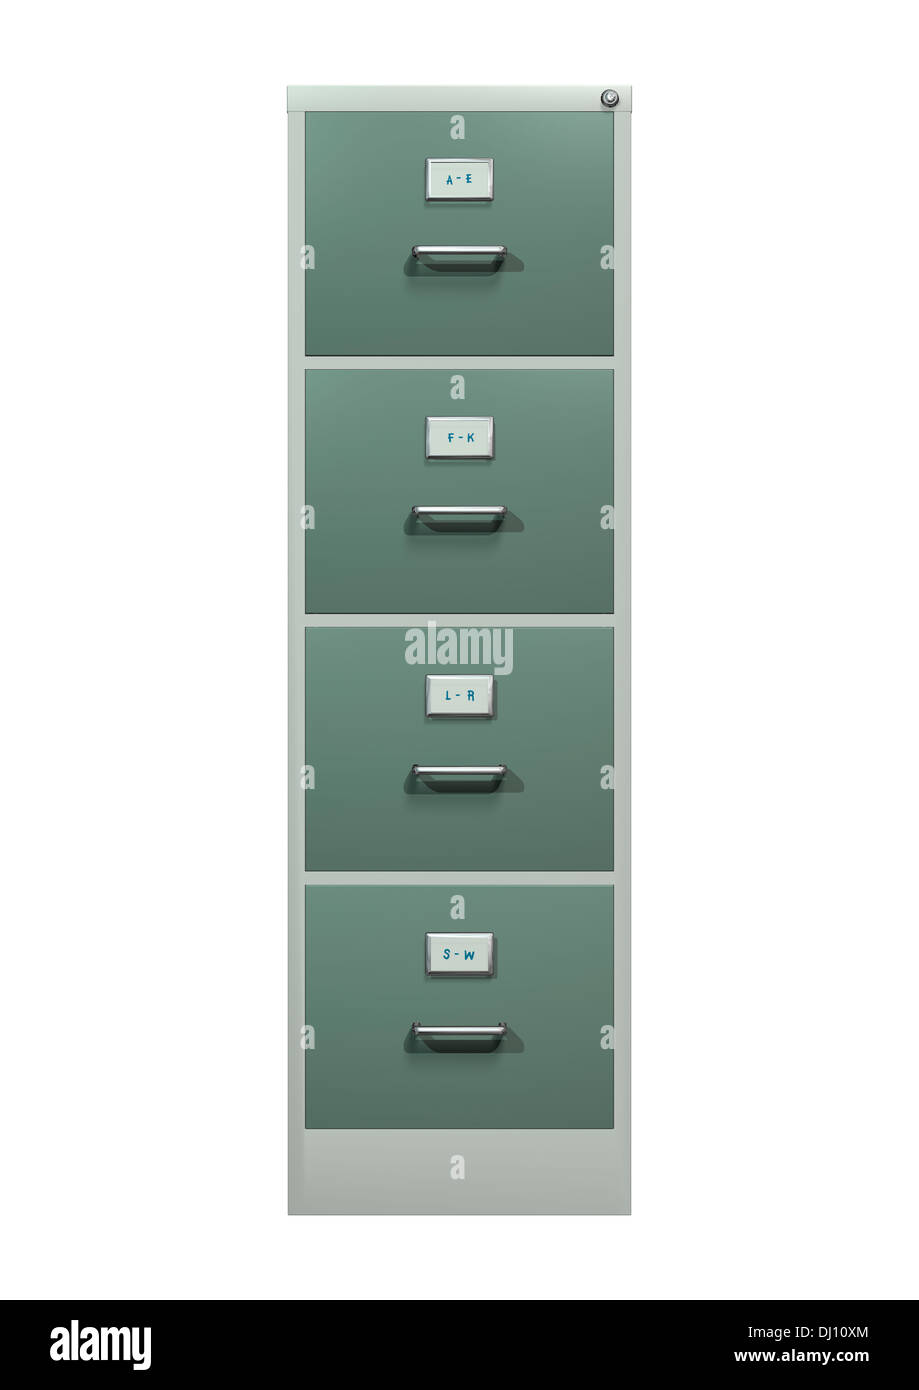 3d Digital Render Of A Stack Cabinet Isolated On White Background